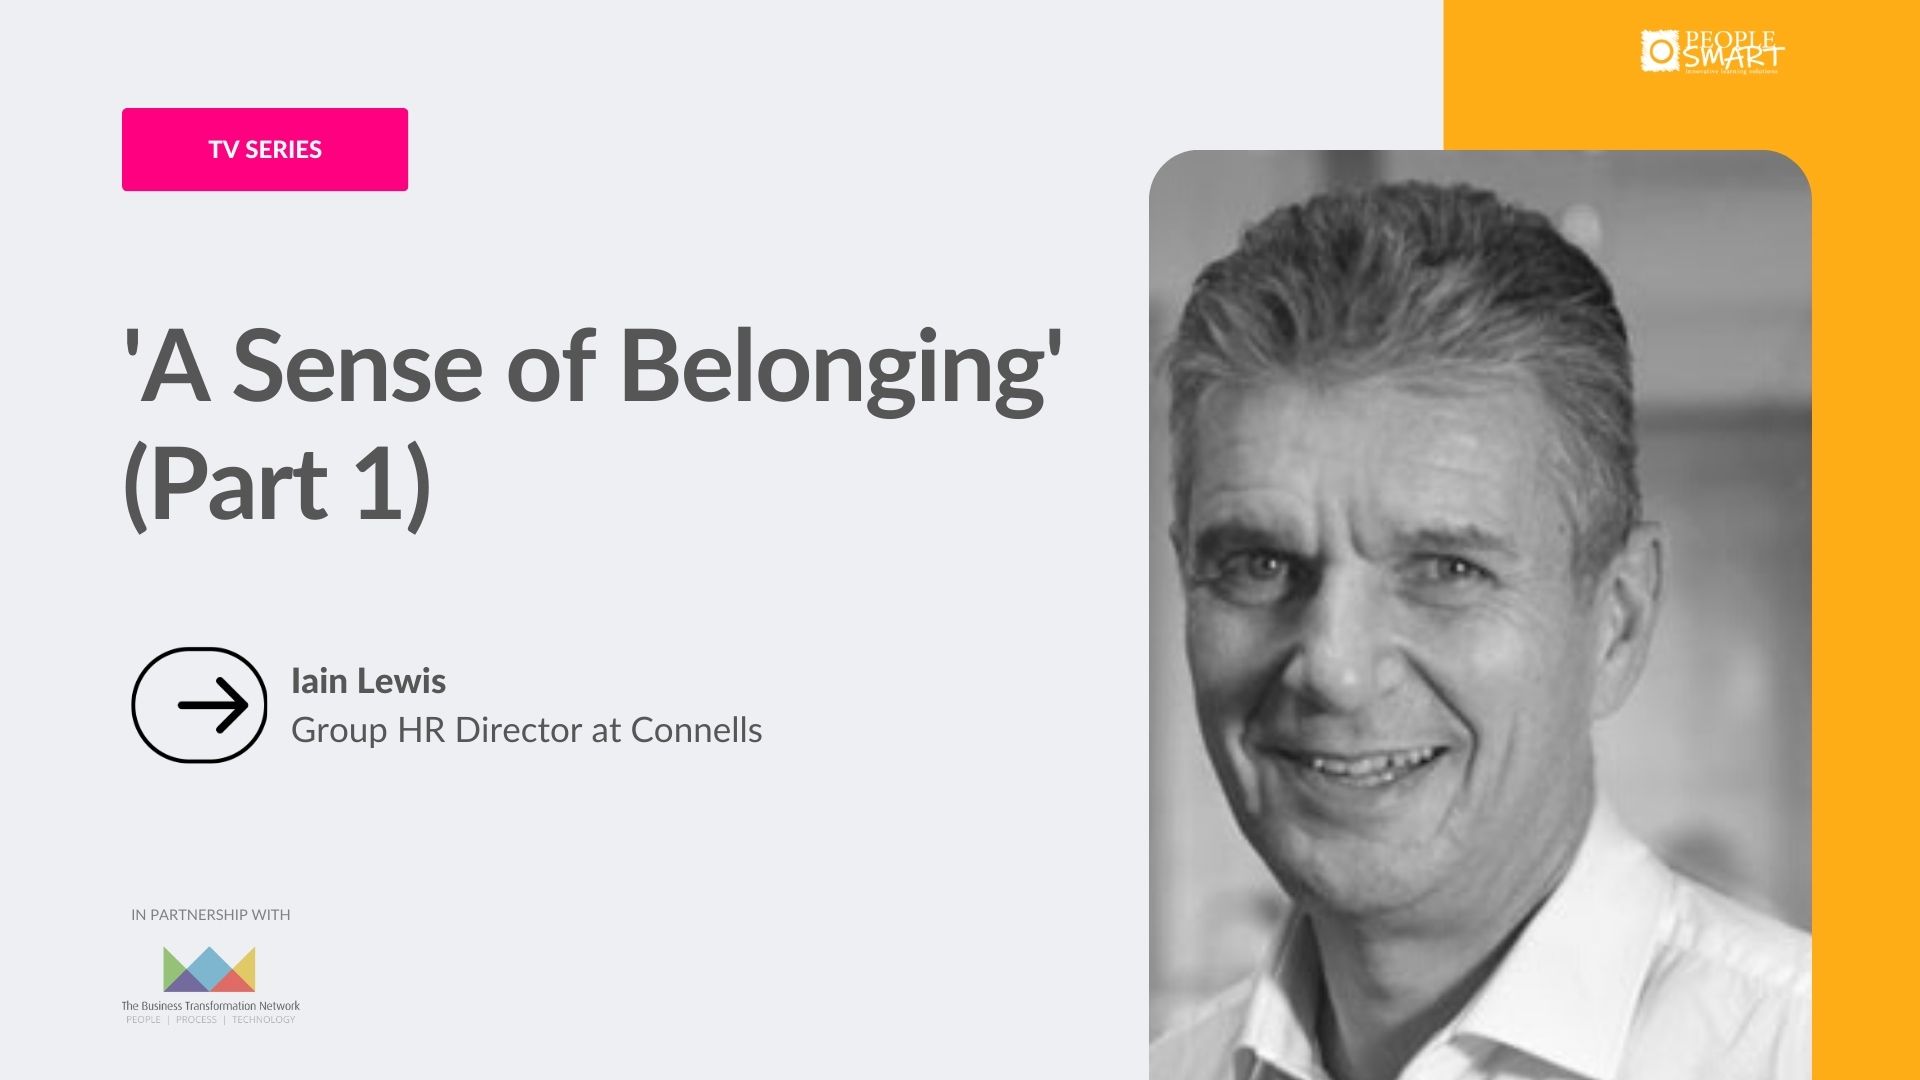 ‘A Sense of Belonging” with Iain Lewis (Part 1)